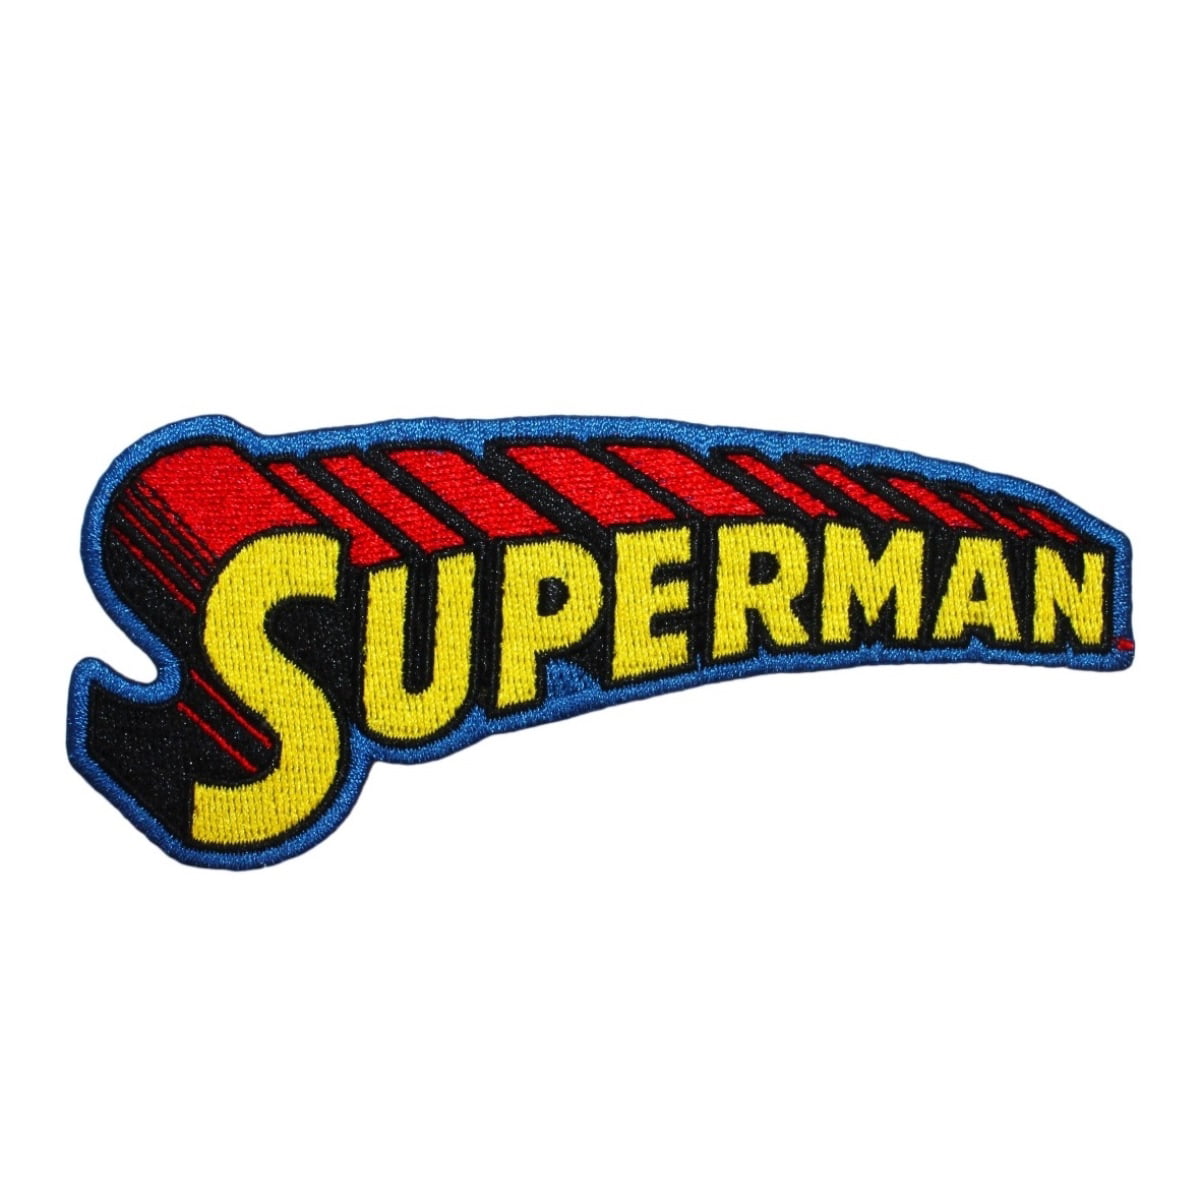 Limited Edition Superman Insignia 7.5"X10" C&D Visionary DC Comics Patch